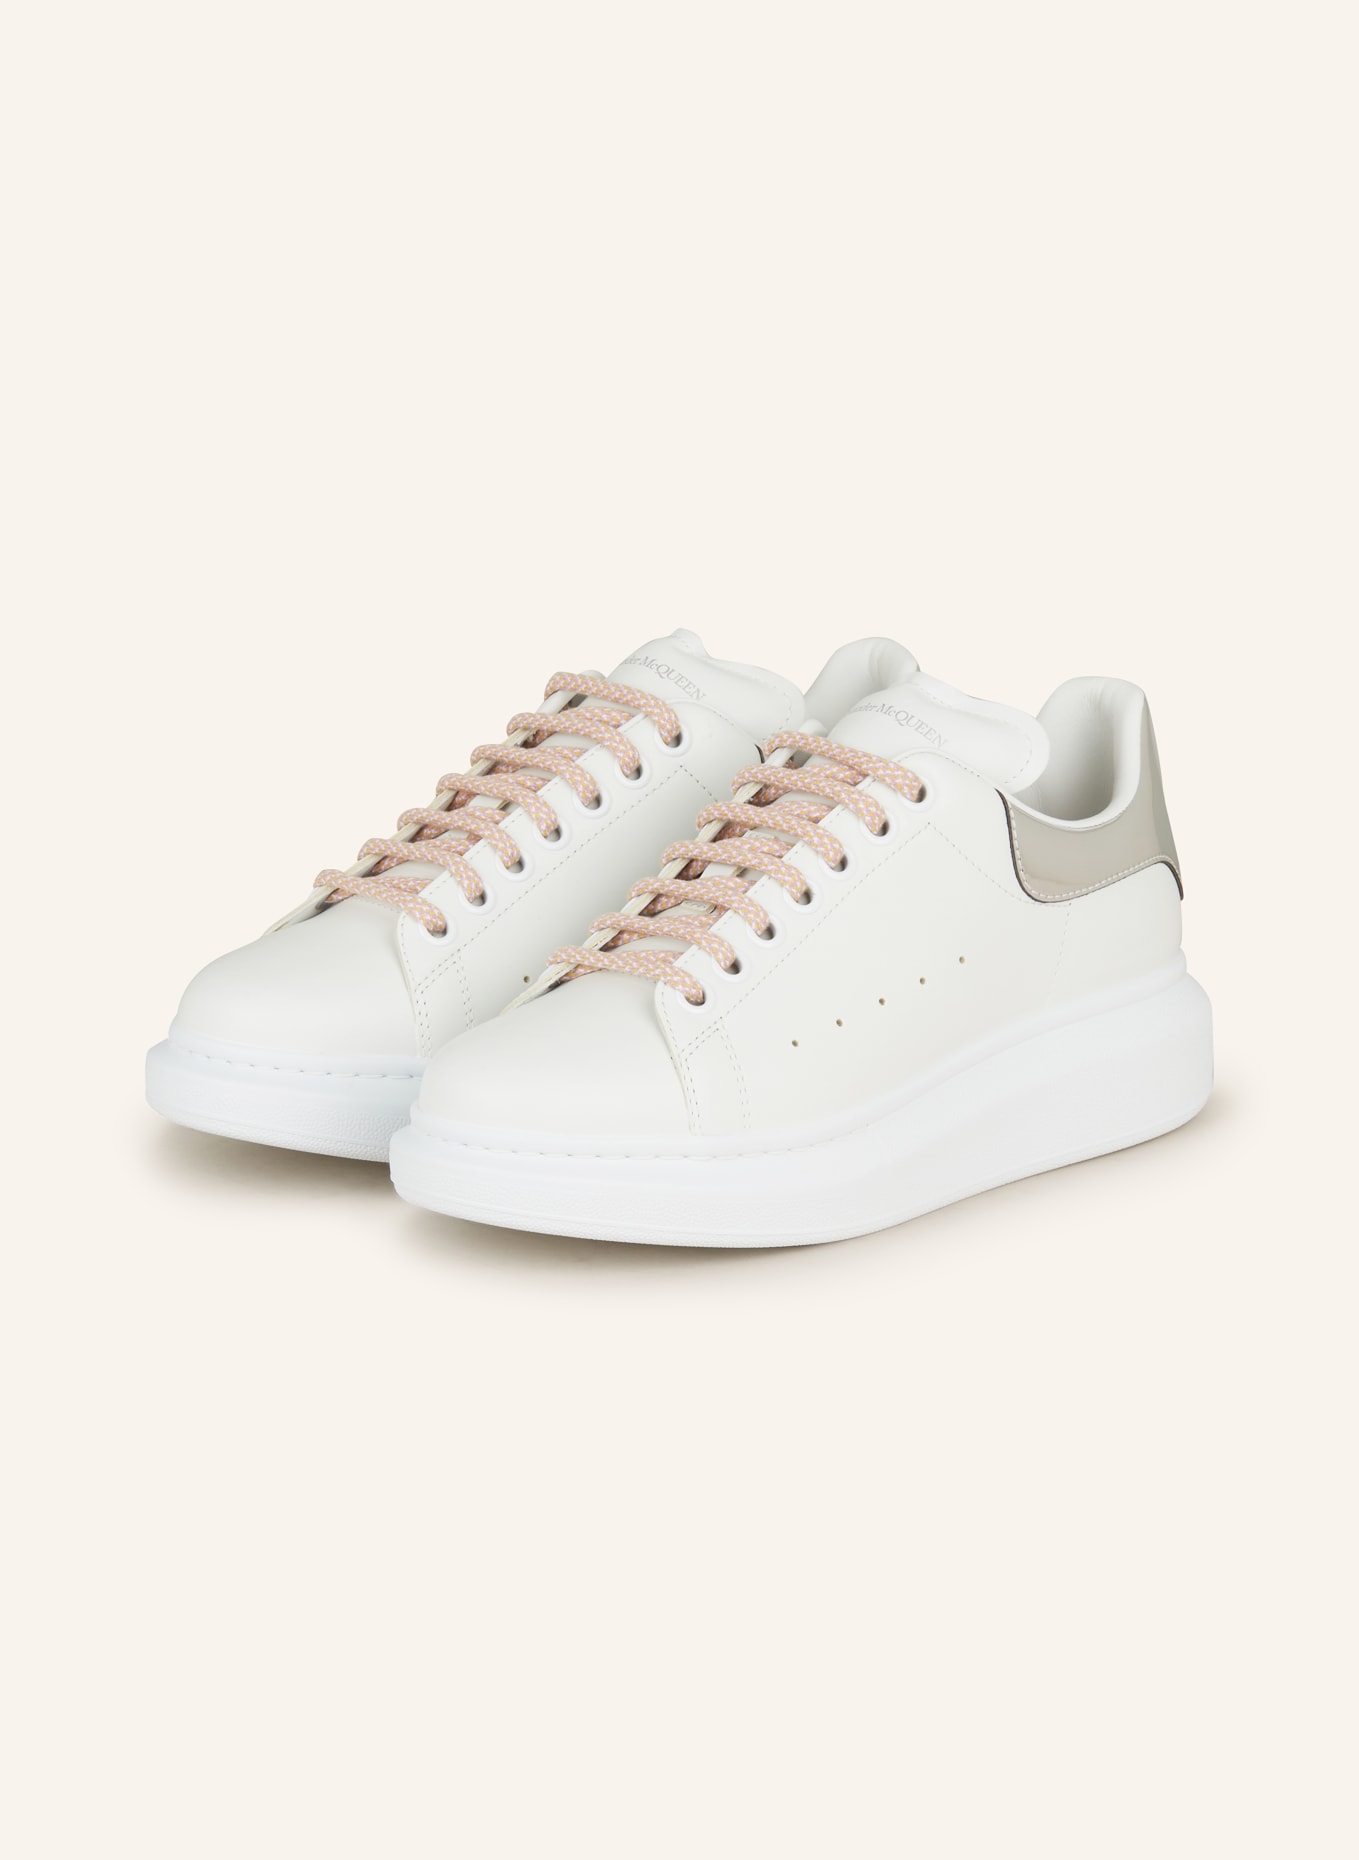 Alexander McQUEEN Sneakers, Color: WHITE/ SILVER (Image 1)